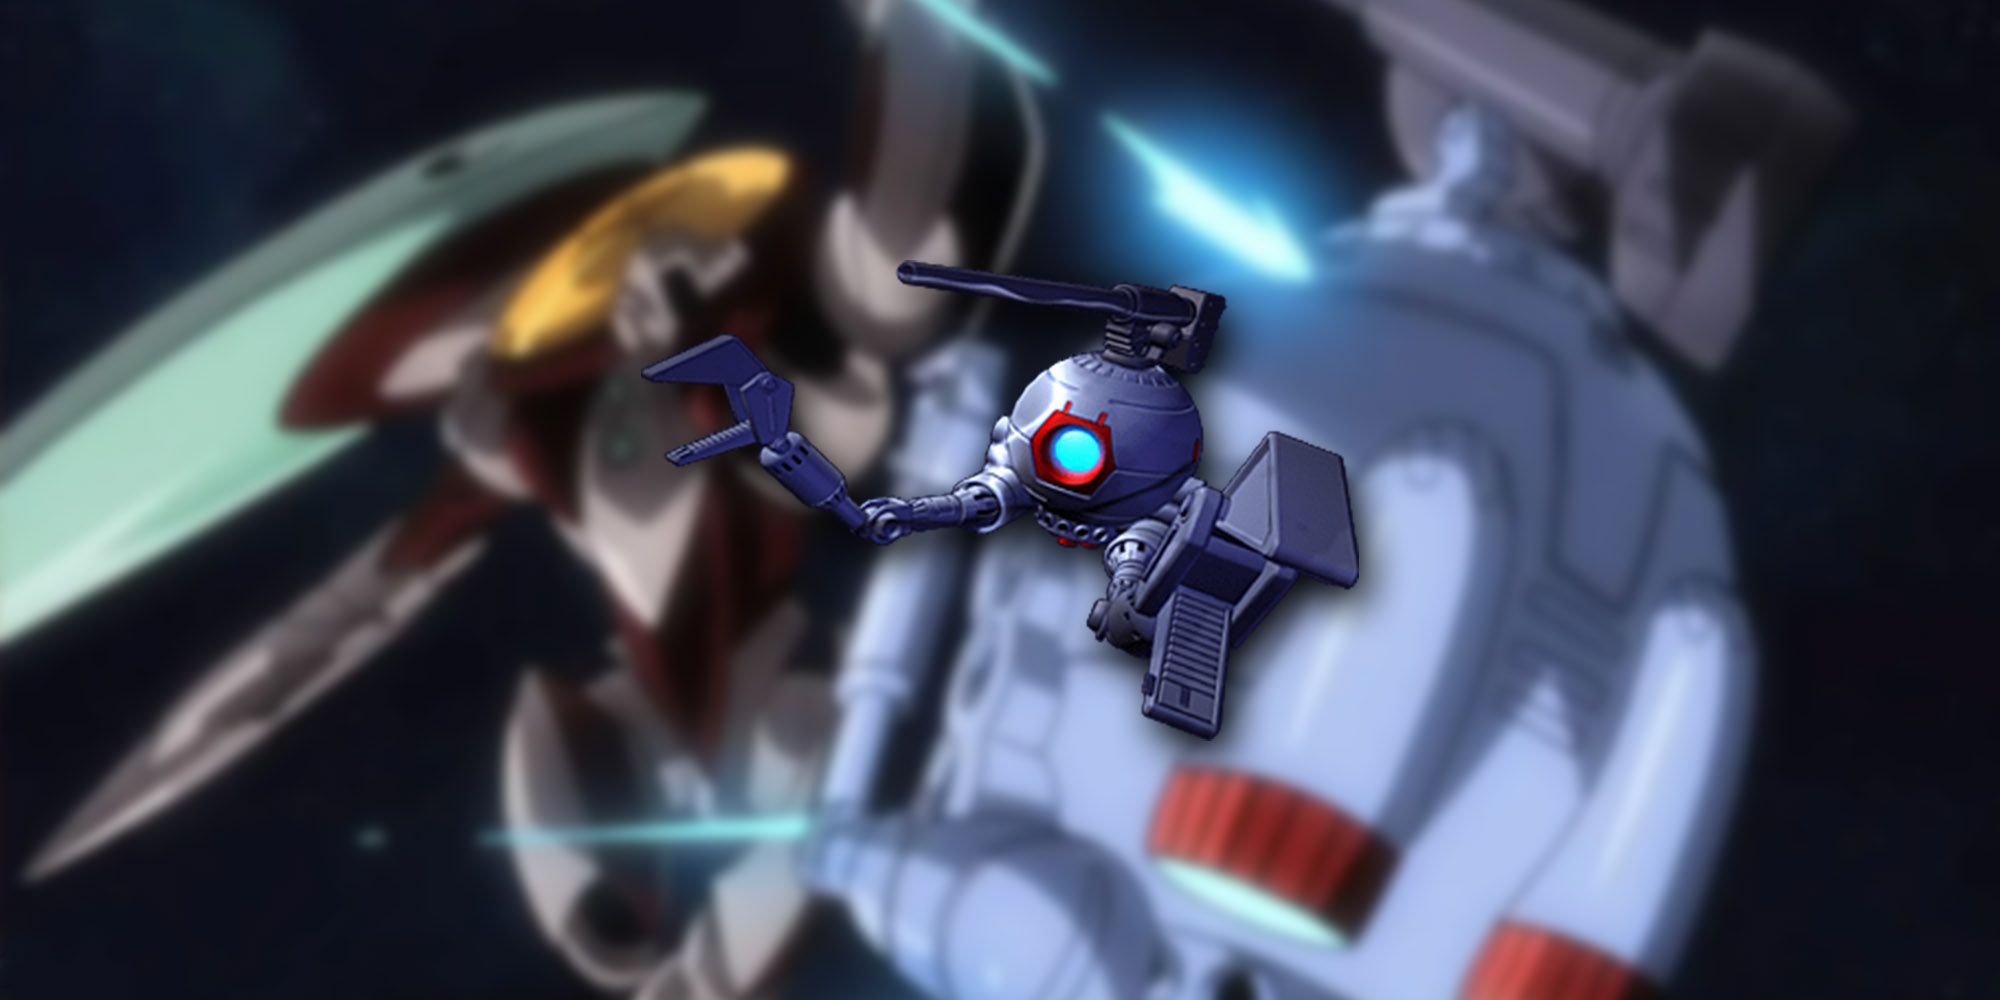 PNG Of R879 Ball Over Image Of Ball From Mobile Suit Gundam